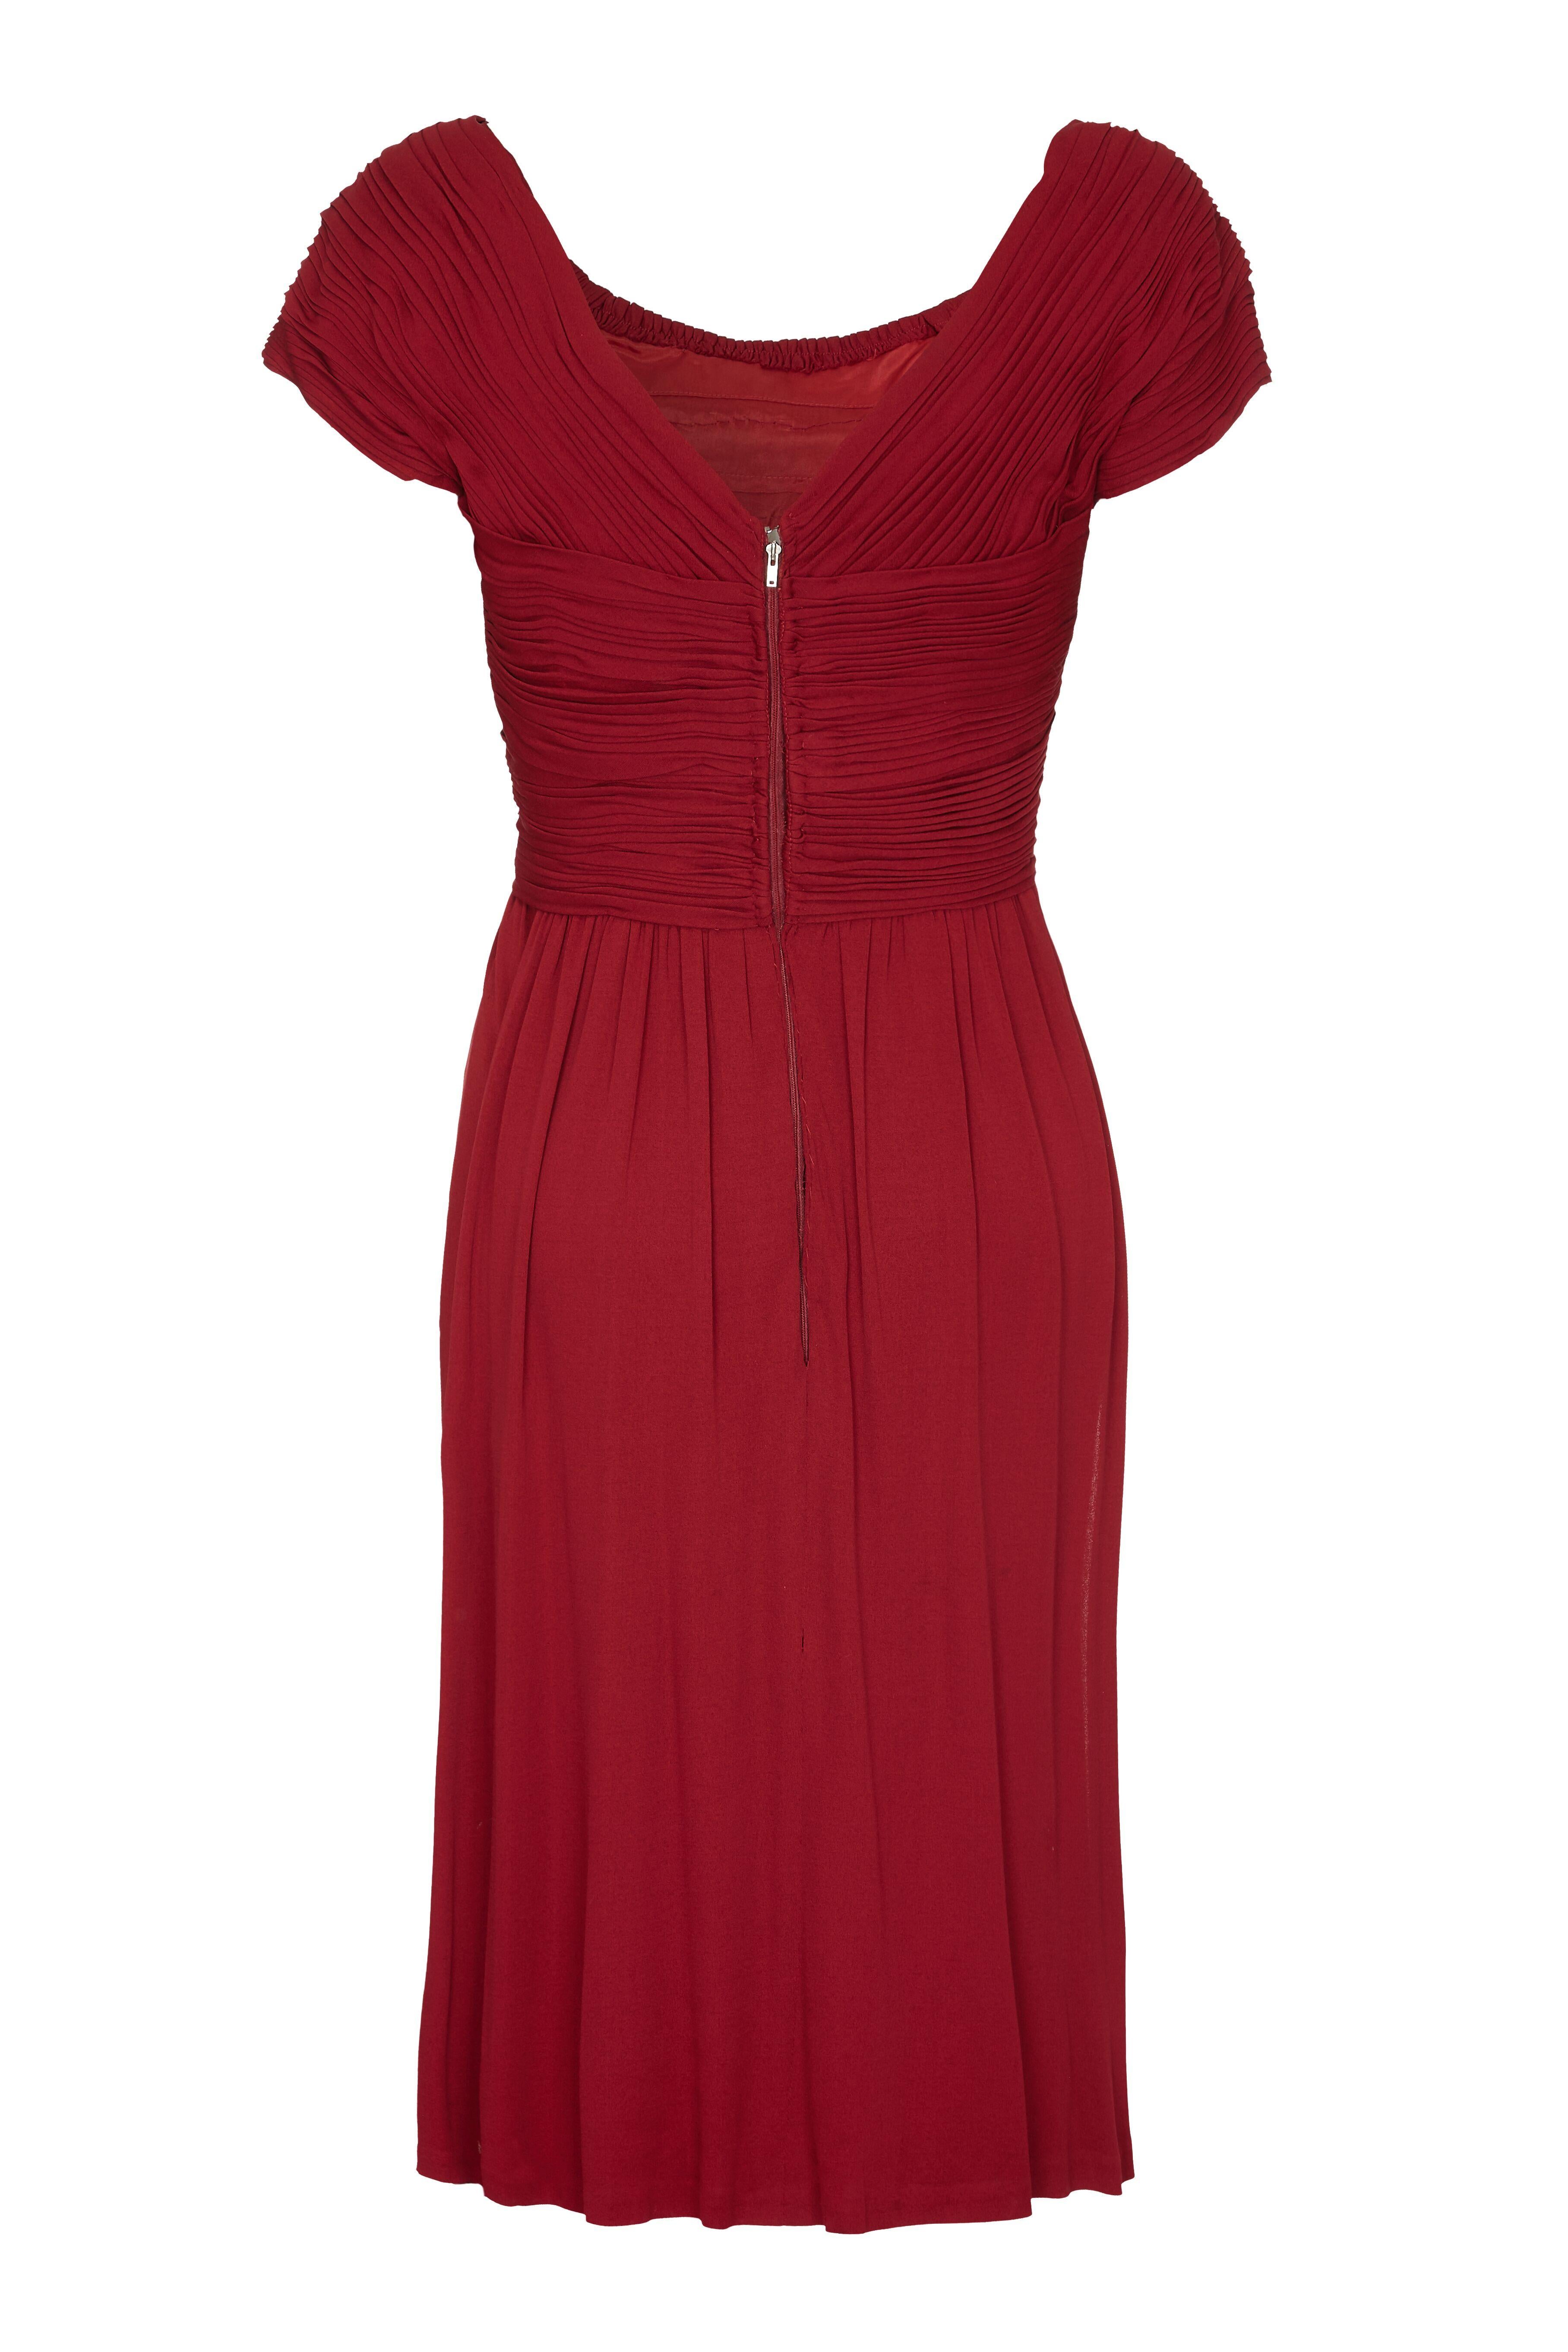 This gorgeous 1950s vintage Harrods boutique dress in deep burgundy showcases some exquisite tailoring with unique pleating on the bodice and sleeves. The simple line of the dress with its soft scoop neckline and cap sleeves is juxtaposed with